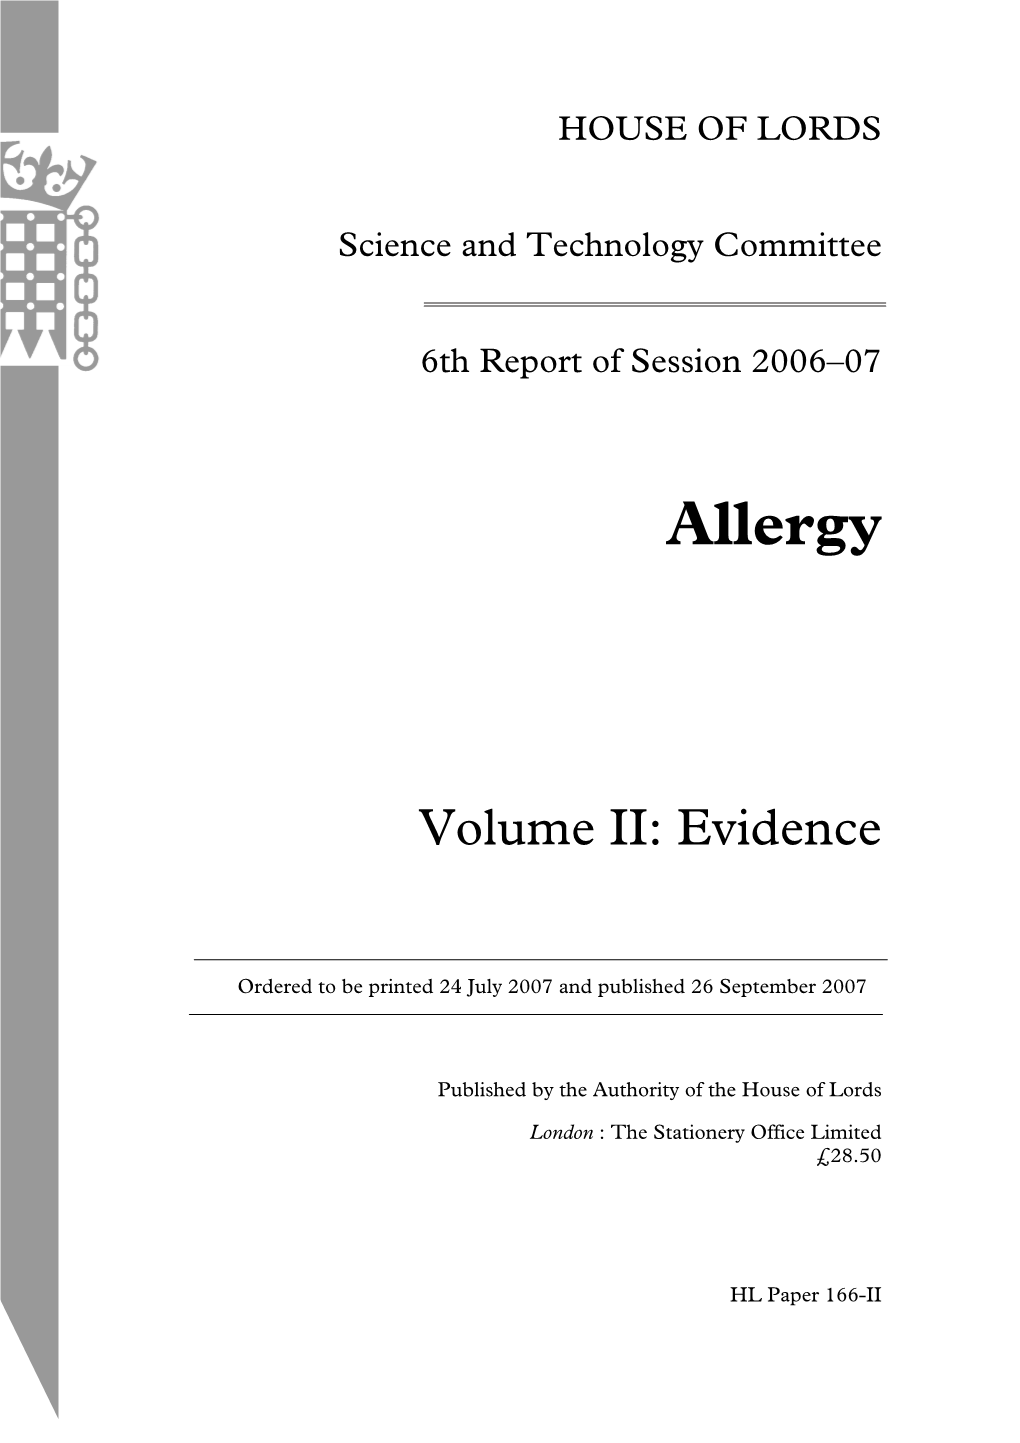 House of Lords – Allergy Report 2007 – Evidence